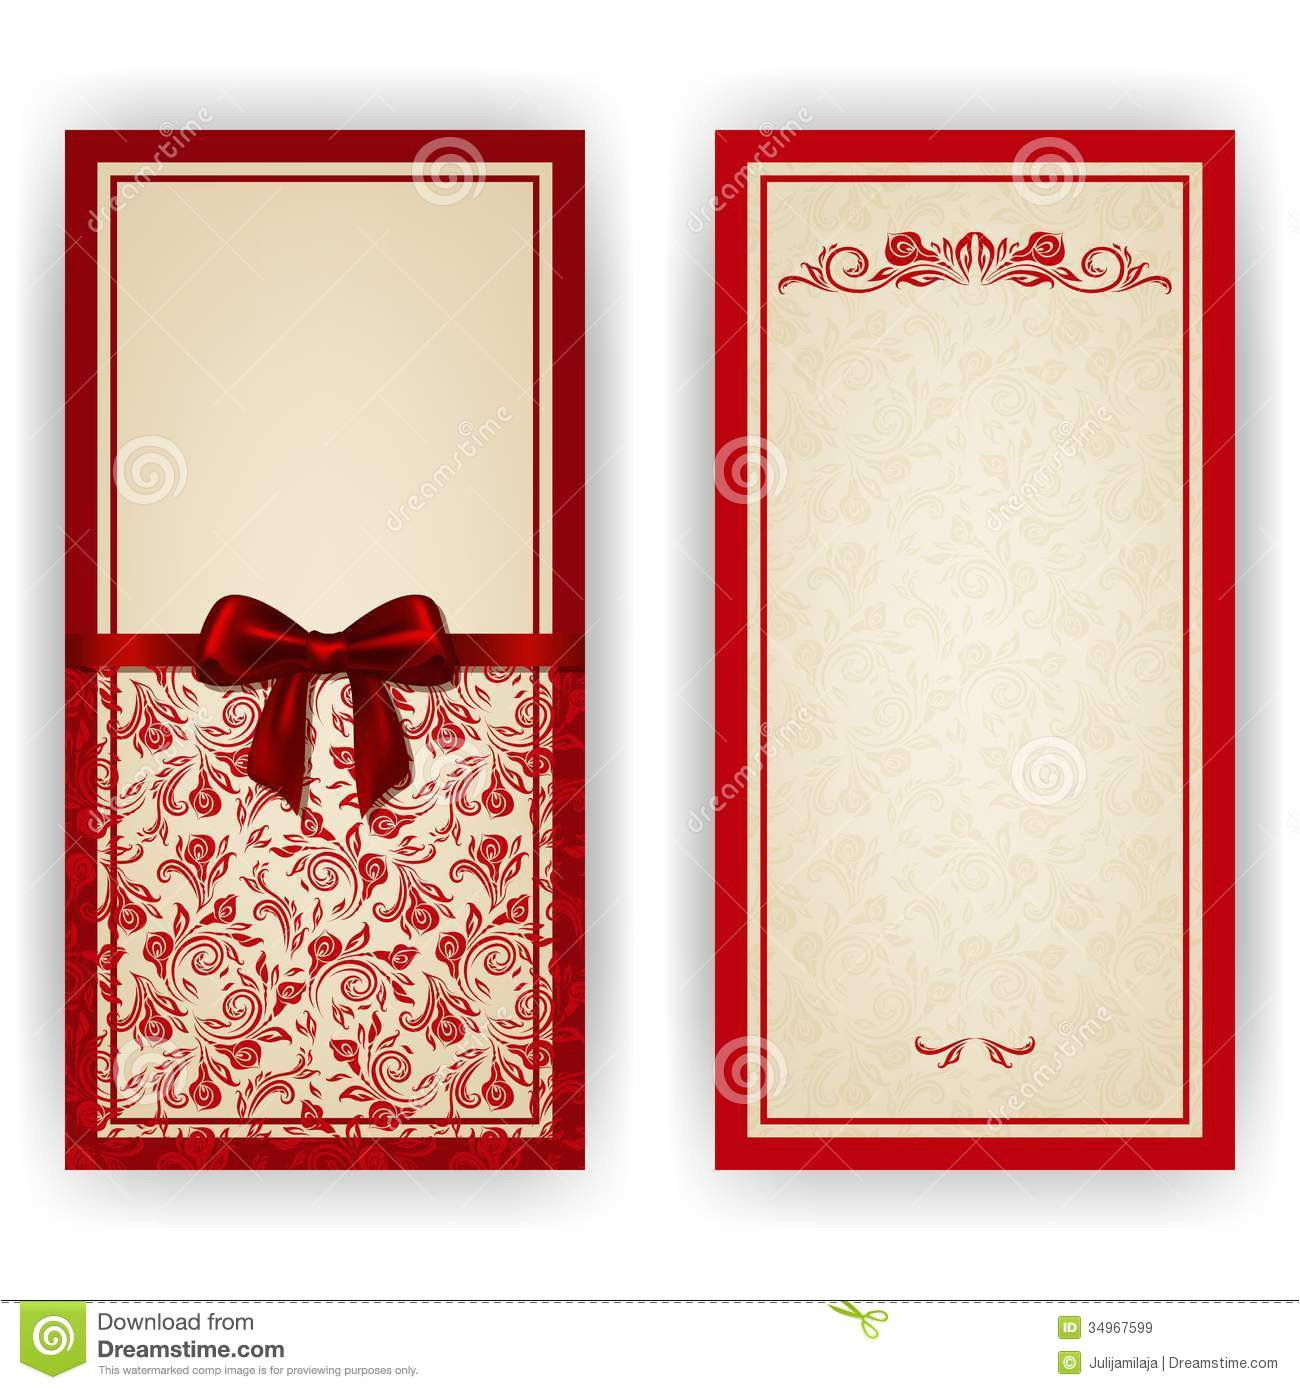 royalty free stock images elegant vector template luxury invitation card lace ornament bow place text floral elements ornate background image34967599